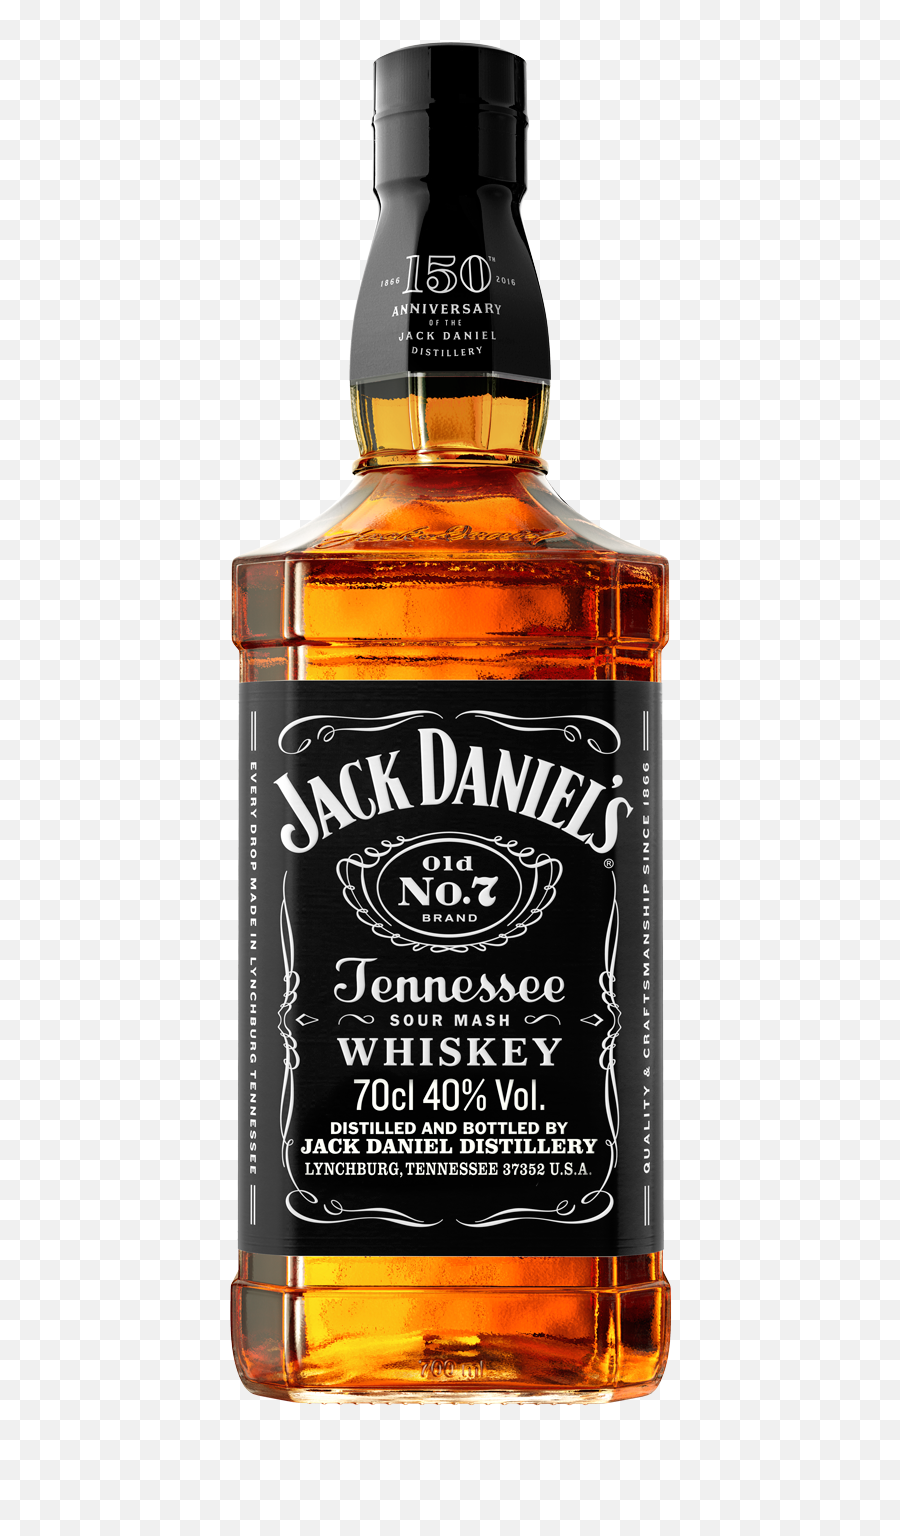 Whisky Png Images Free Download - Jack Daniels,Whiskey Png